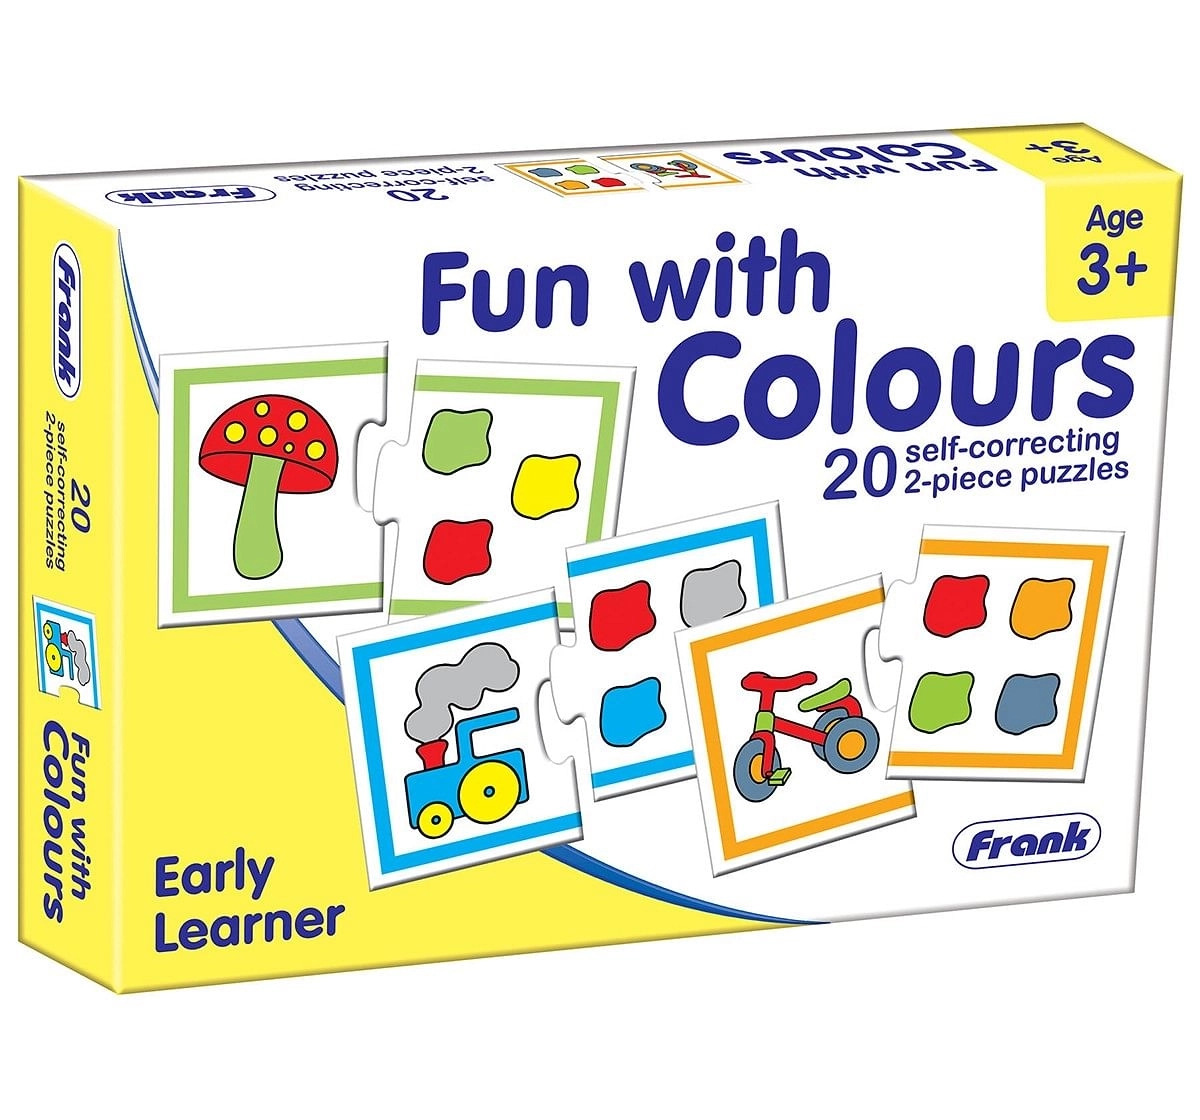 Frank Fun With Colours DIY Art & Craft Kits for Kids age 3Y+ 